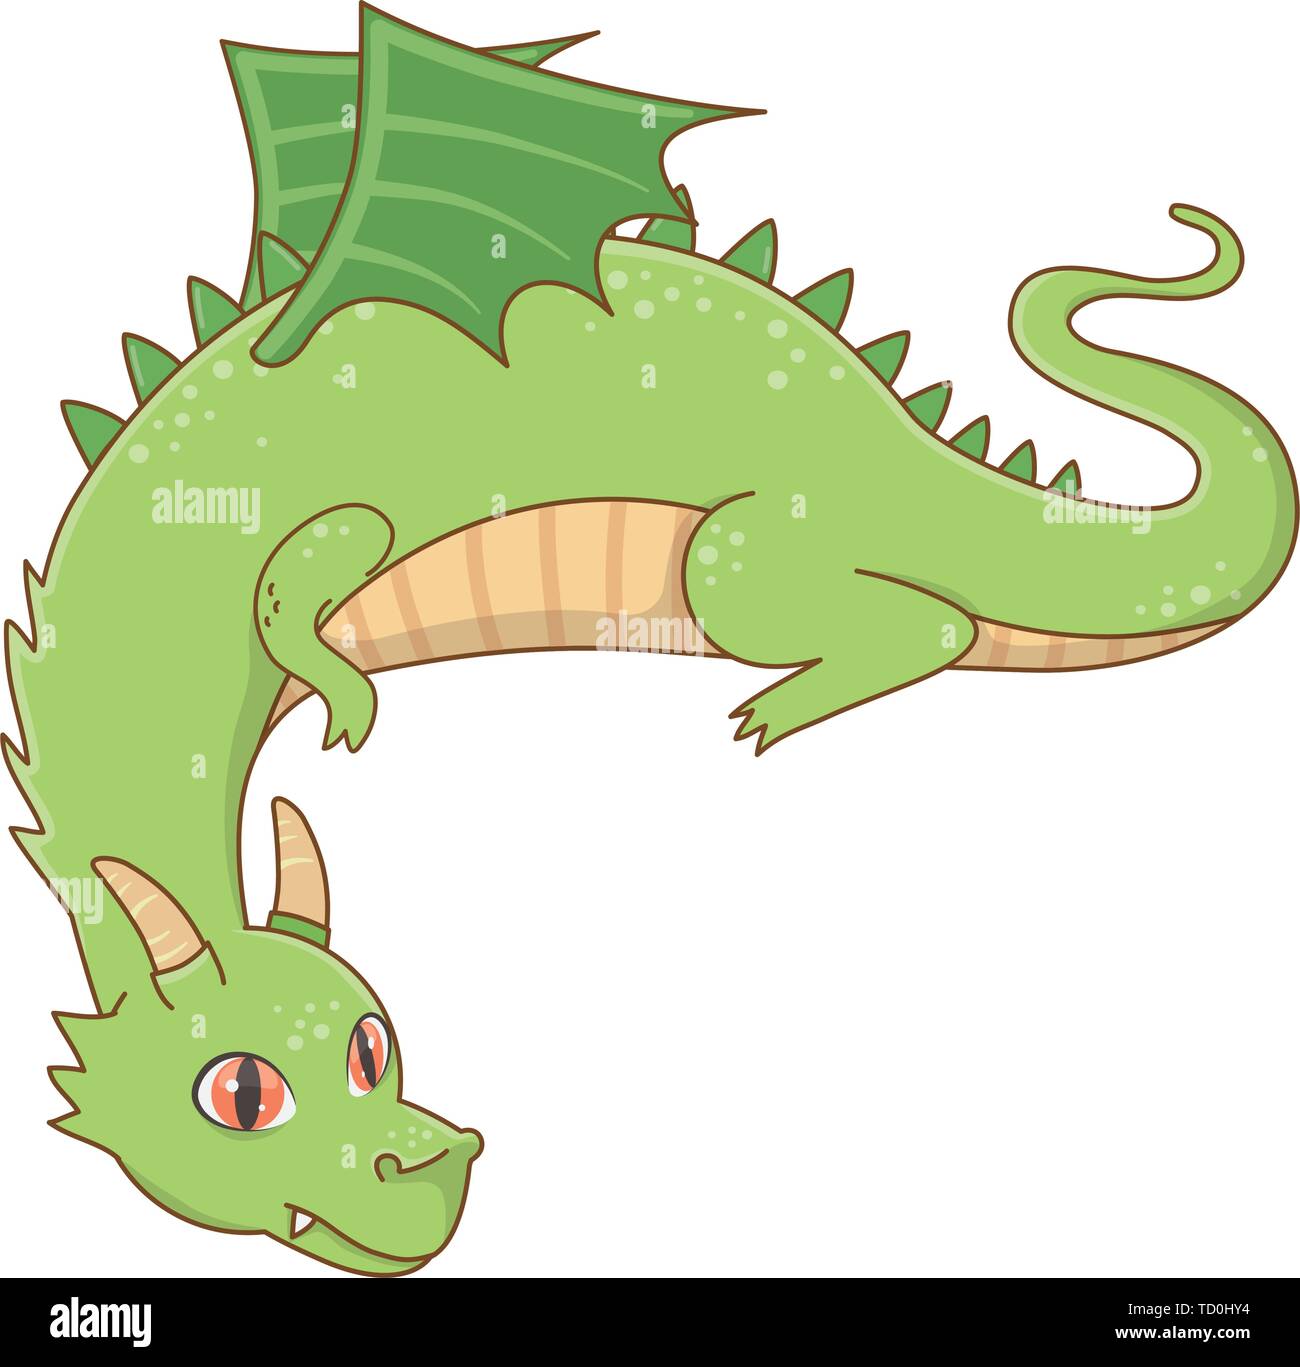 Dragon cartoon design, Chinese asian fantasy animal monster and culture theme Vector illustration Stock Vector